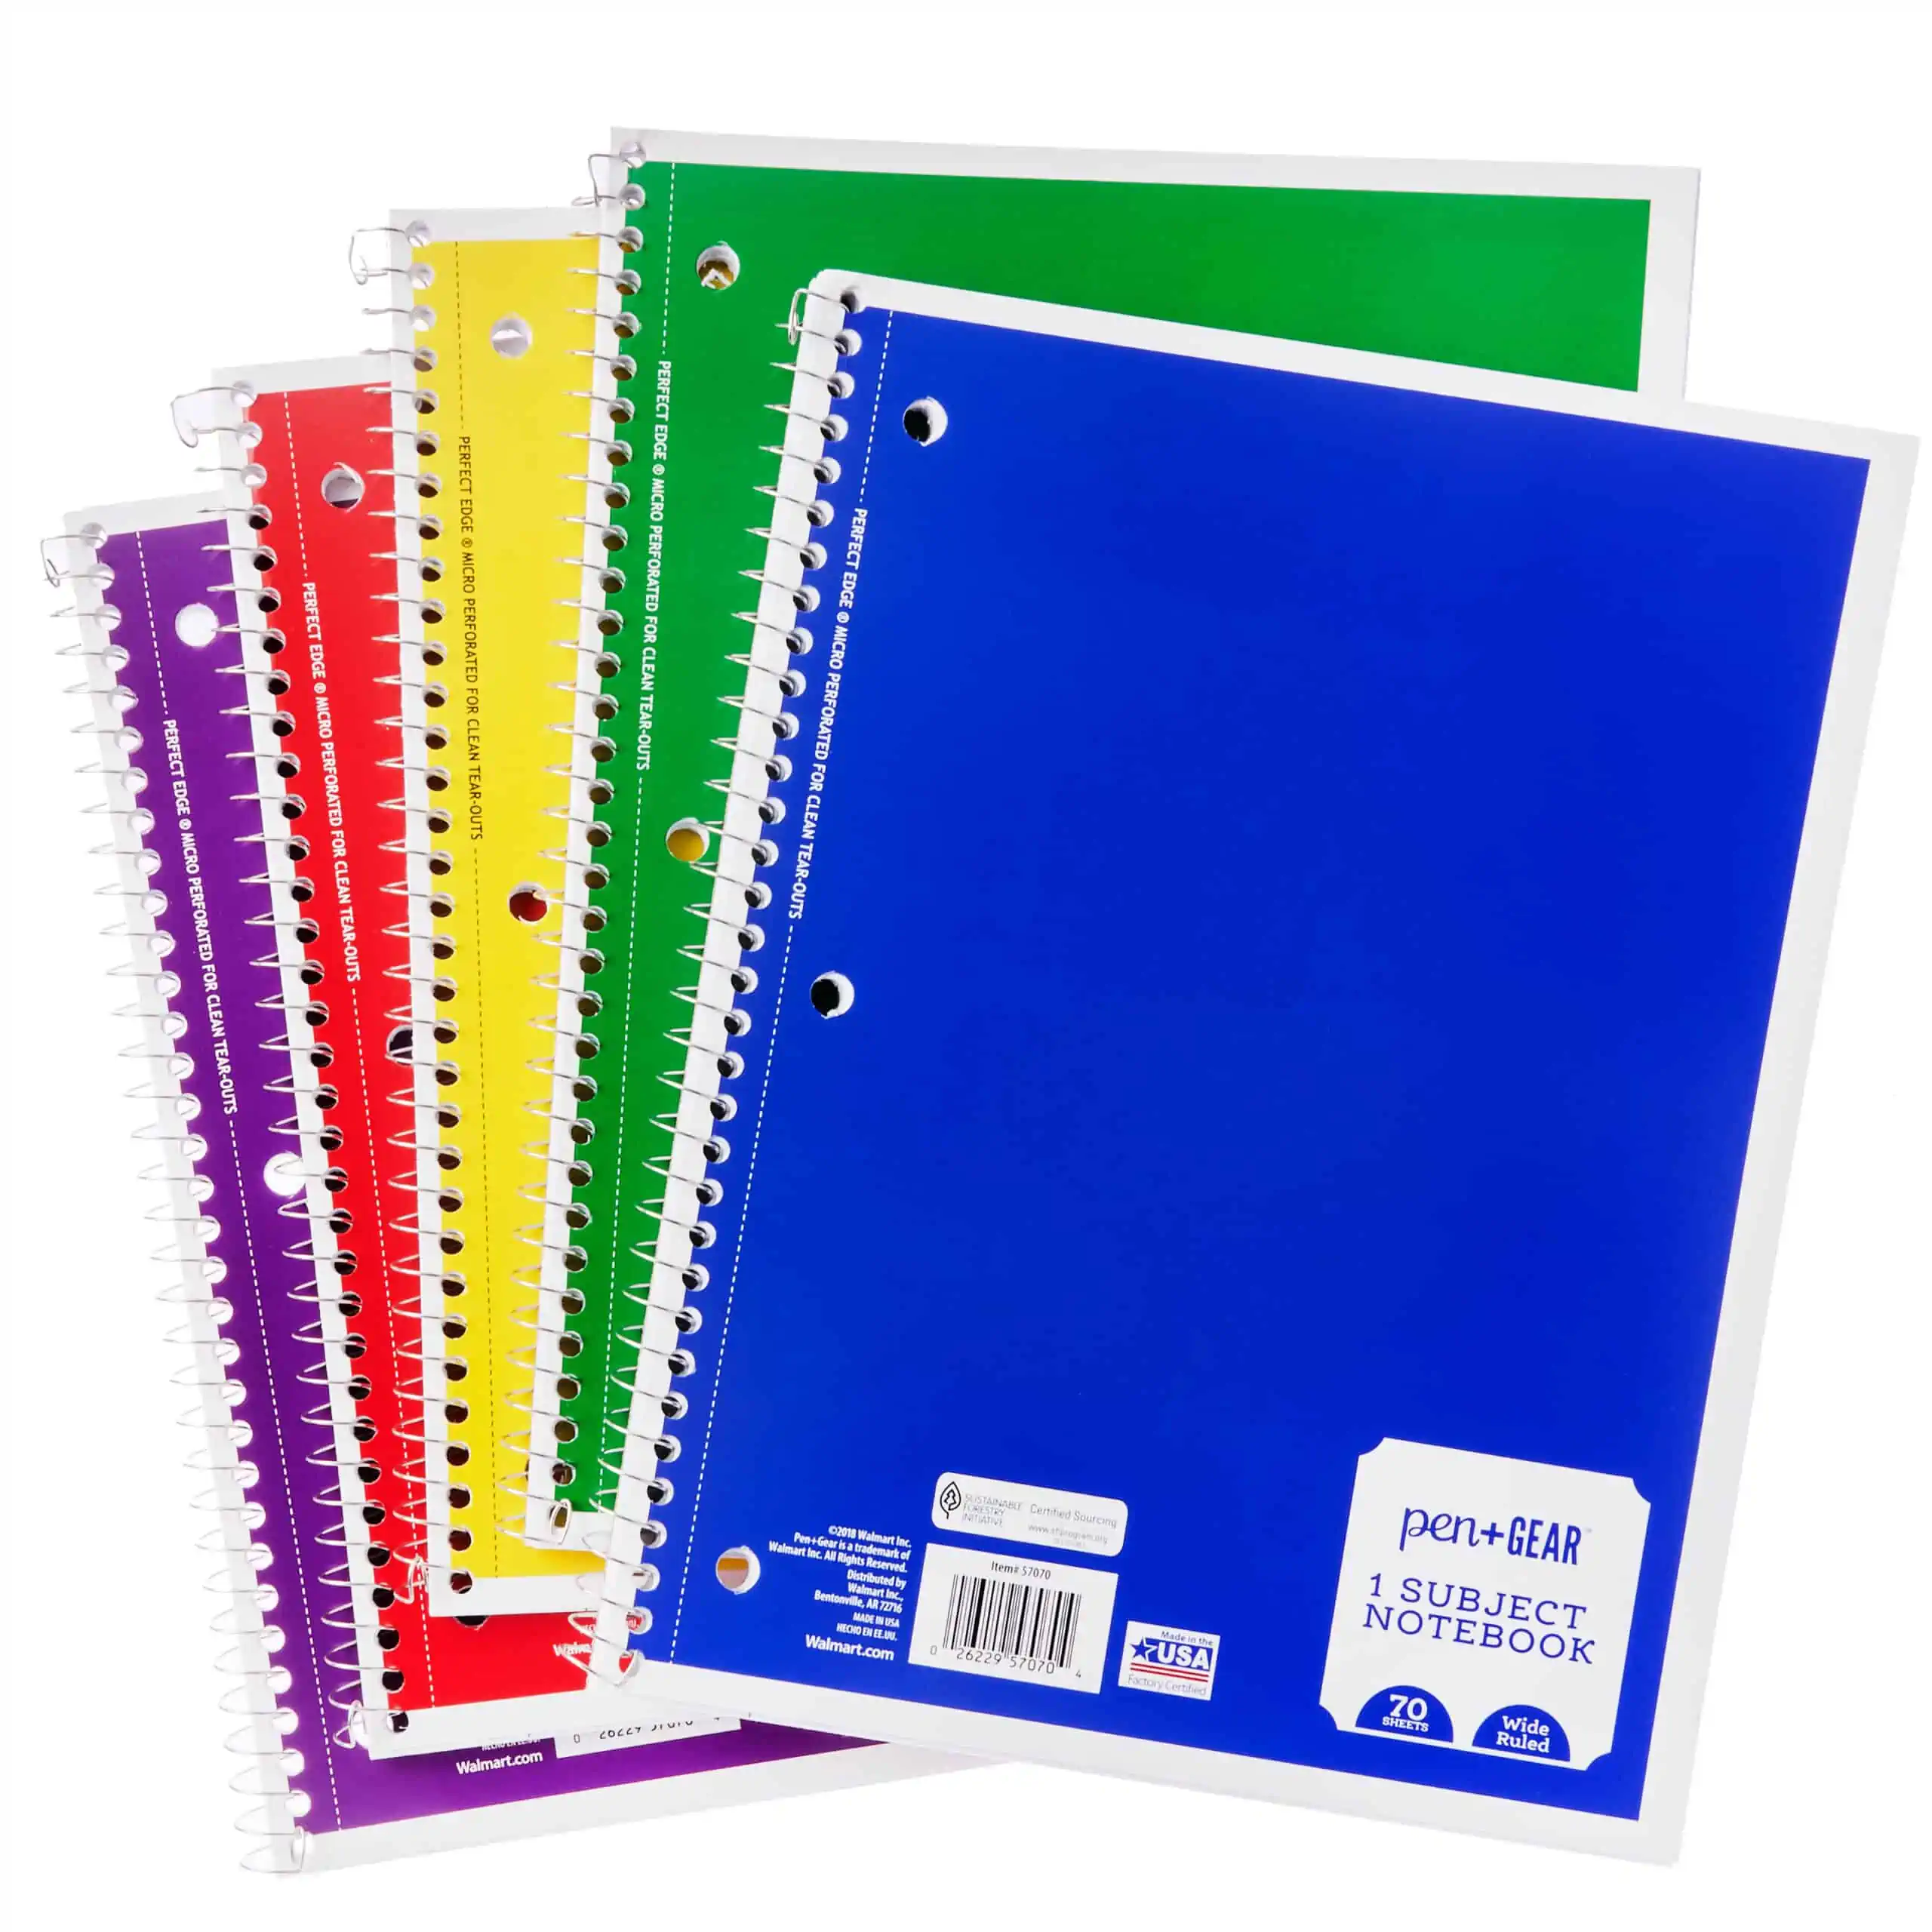 A stack of colorful spiral notebooks, including purple, red, yellow, green, and blue notebooks.